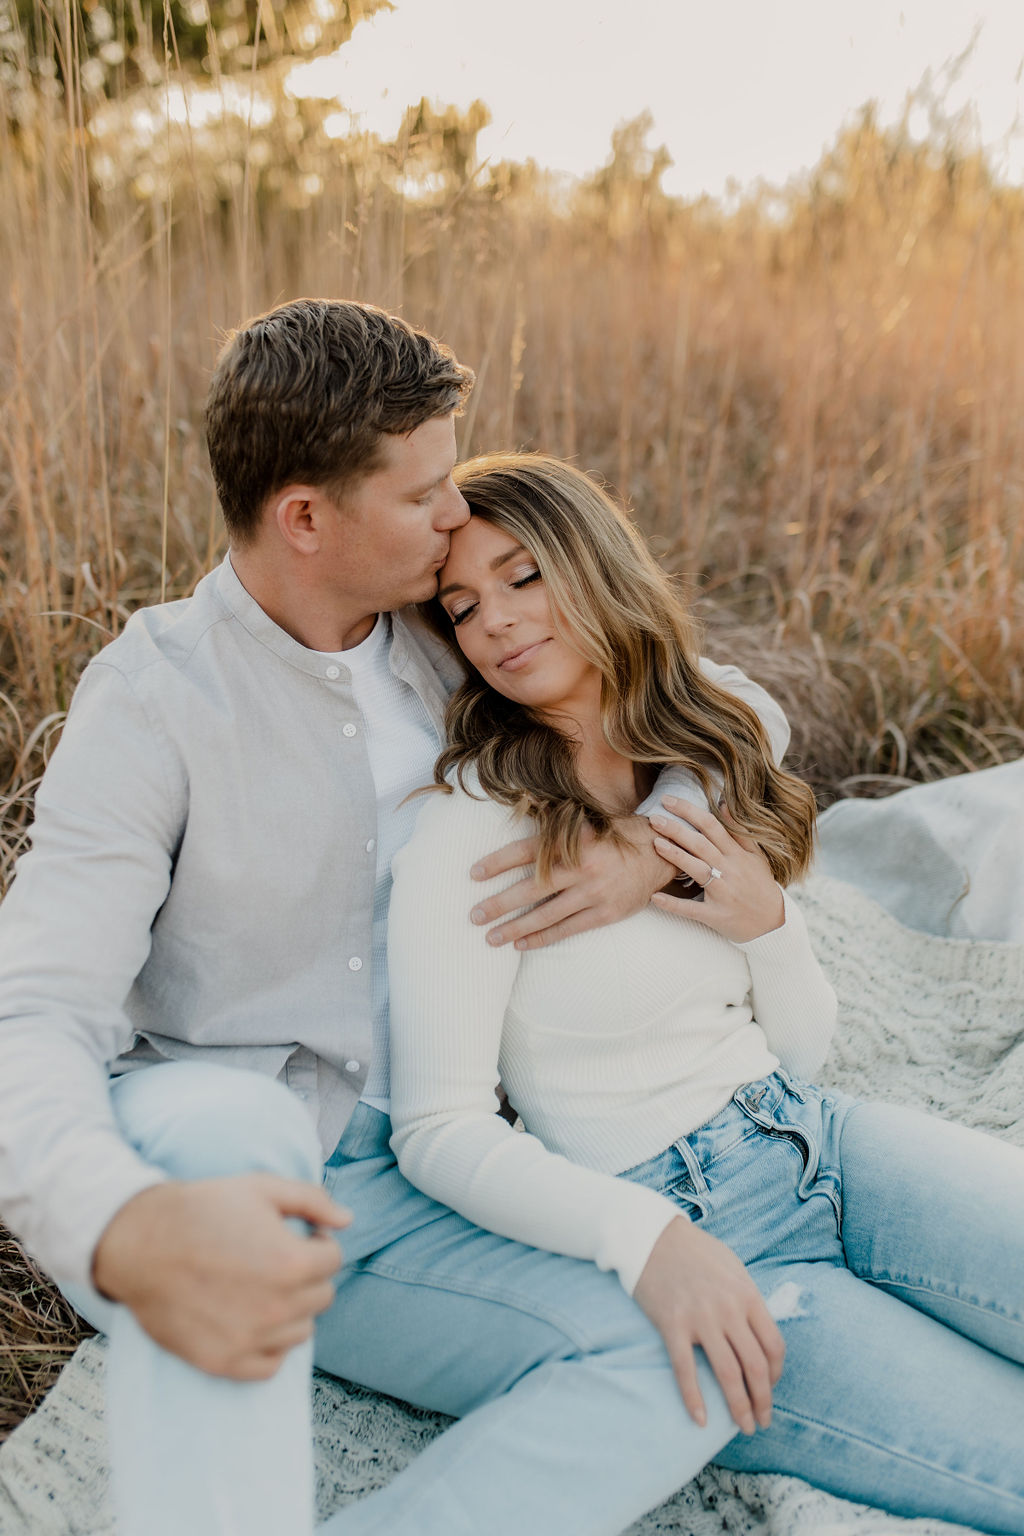 Intimate Fall Engagement Photos at Shawnee Mission Park